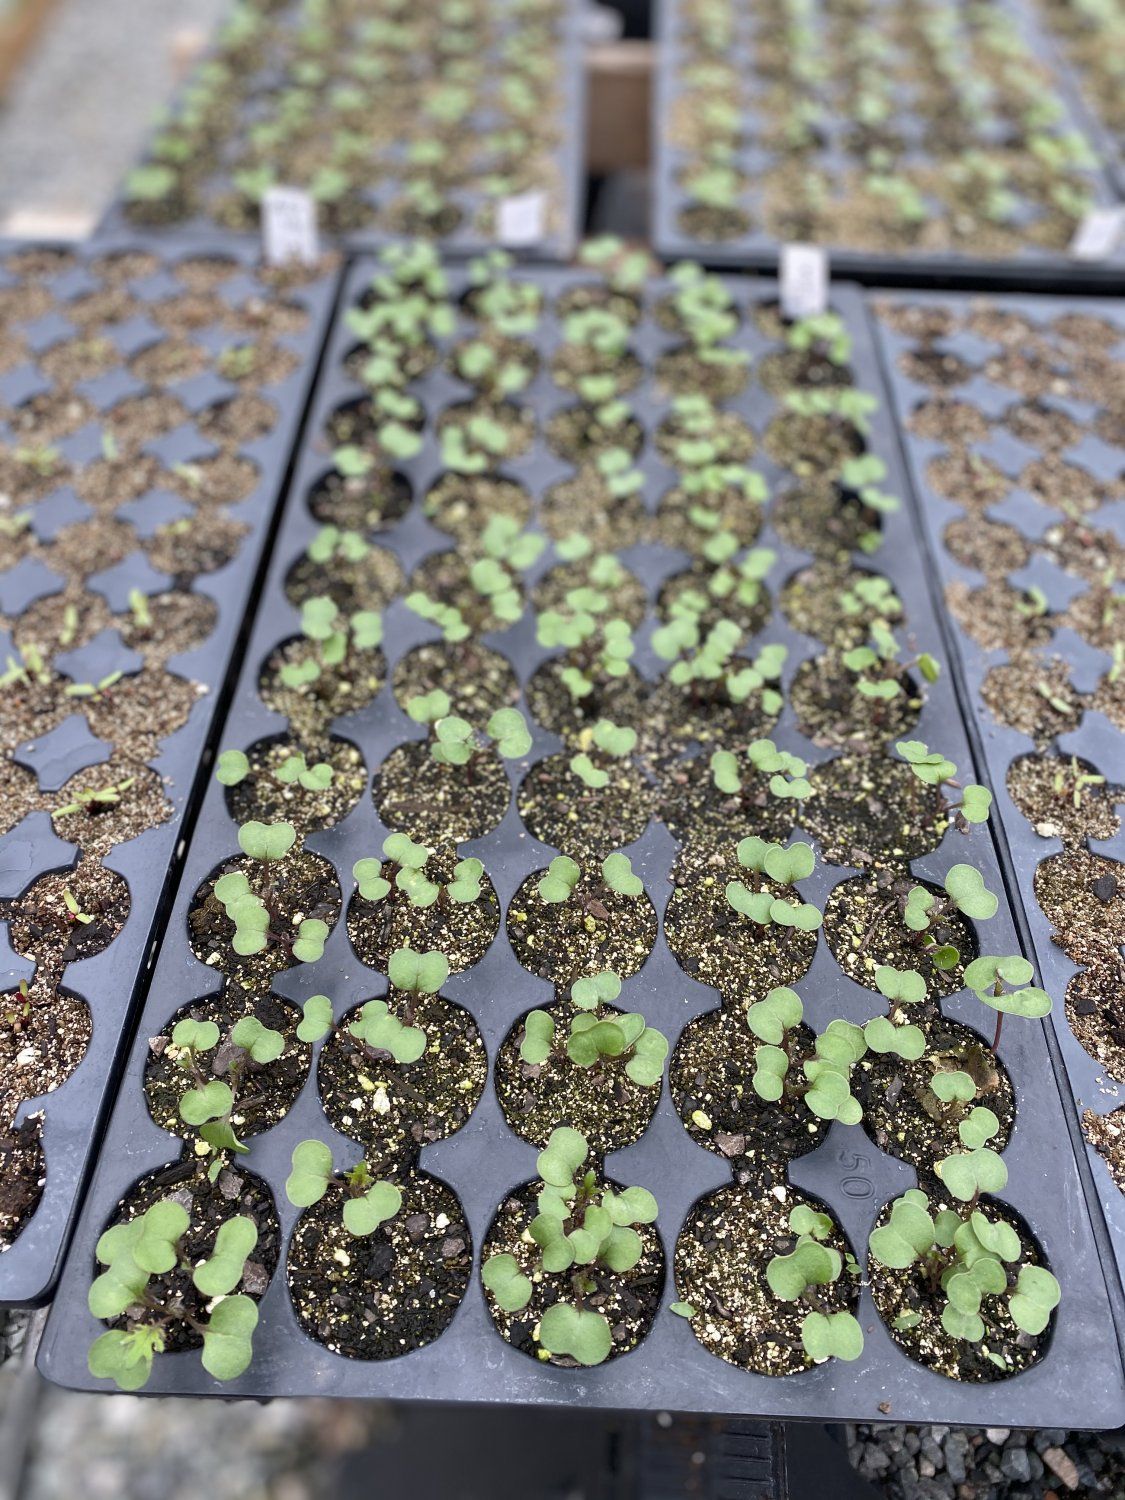 Fall greenhouse is going!